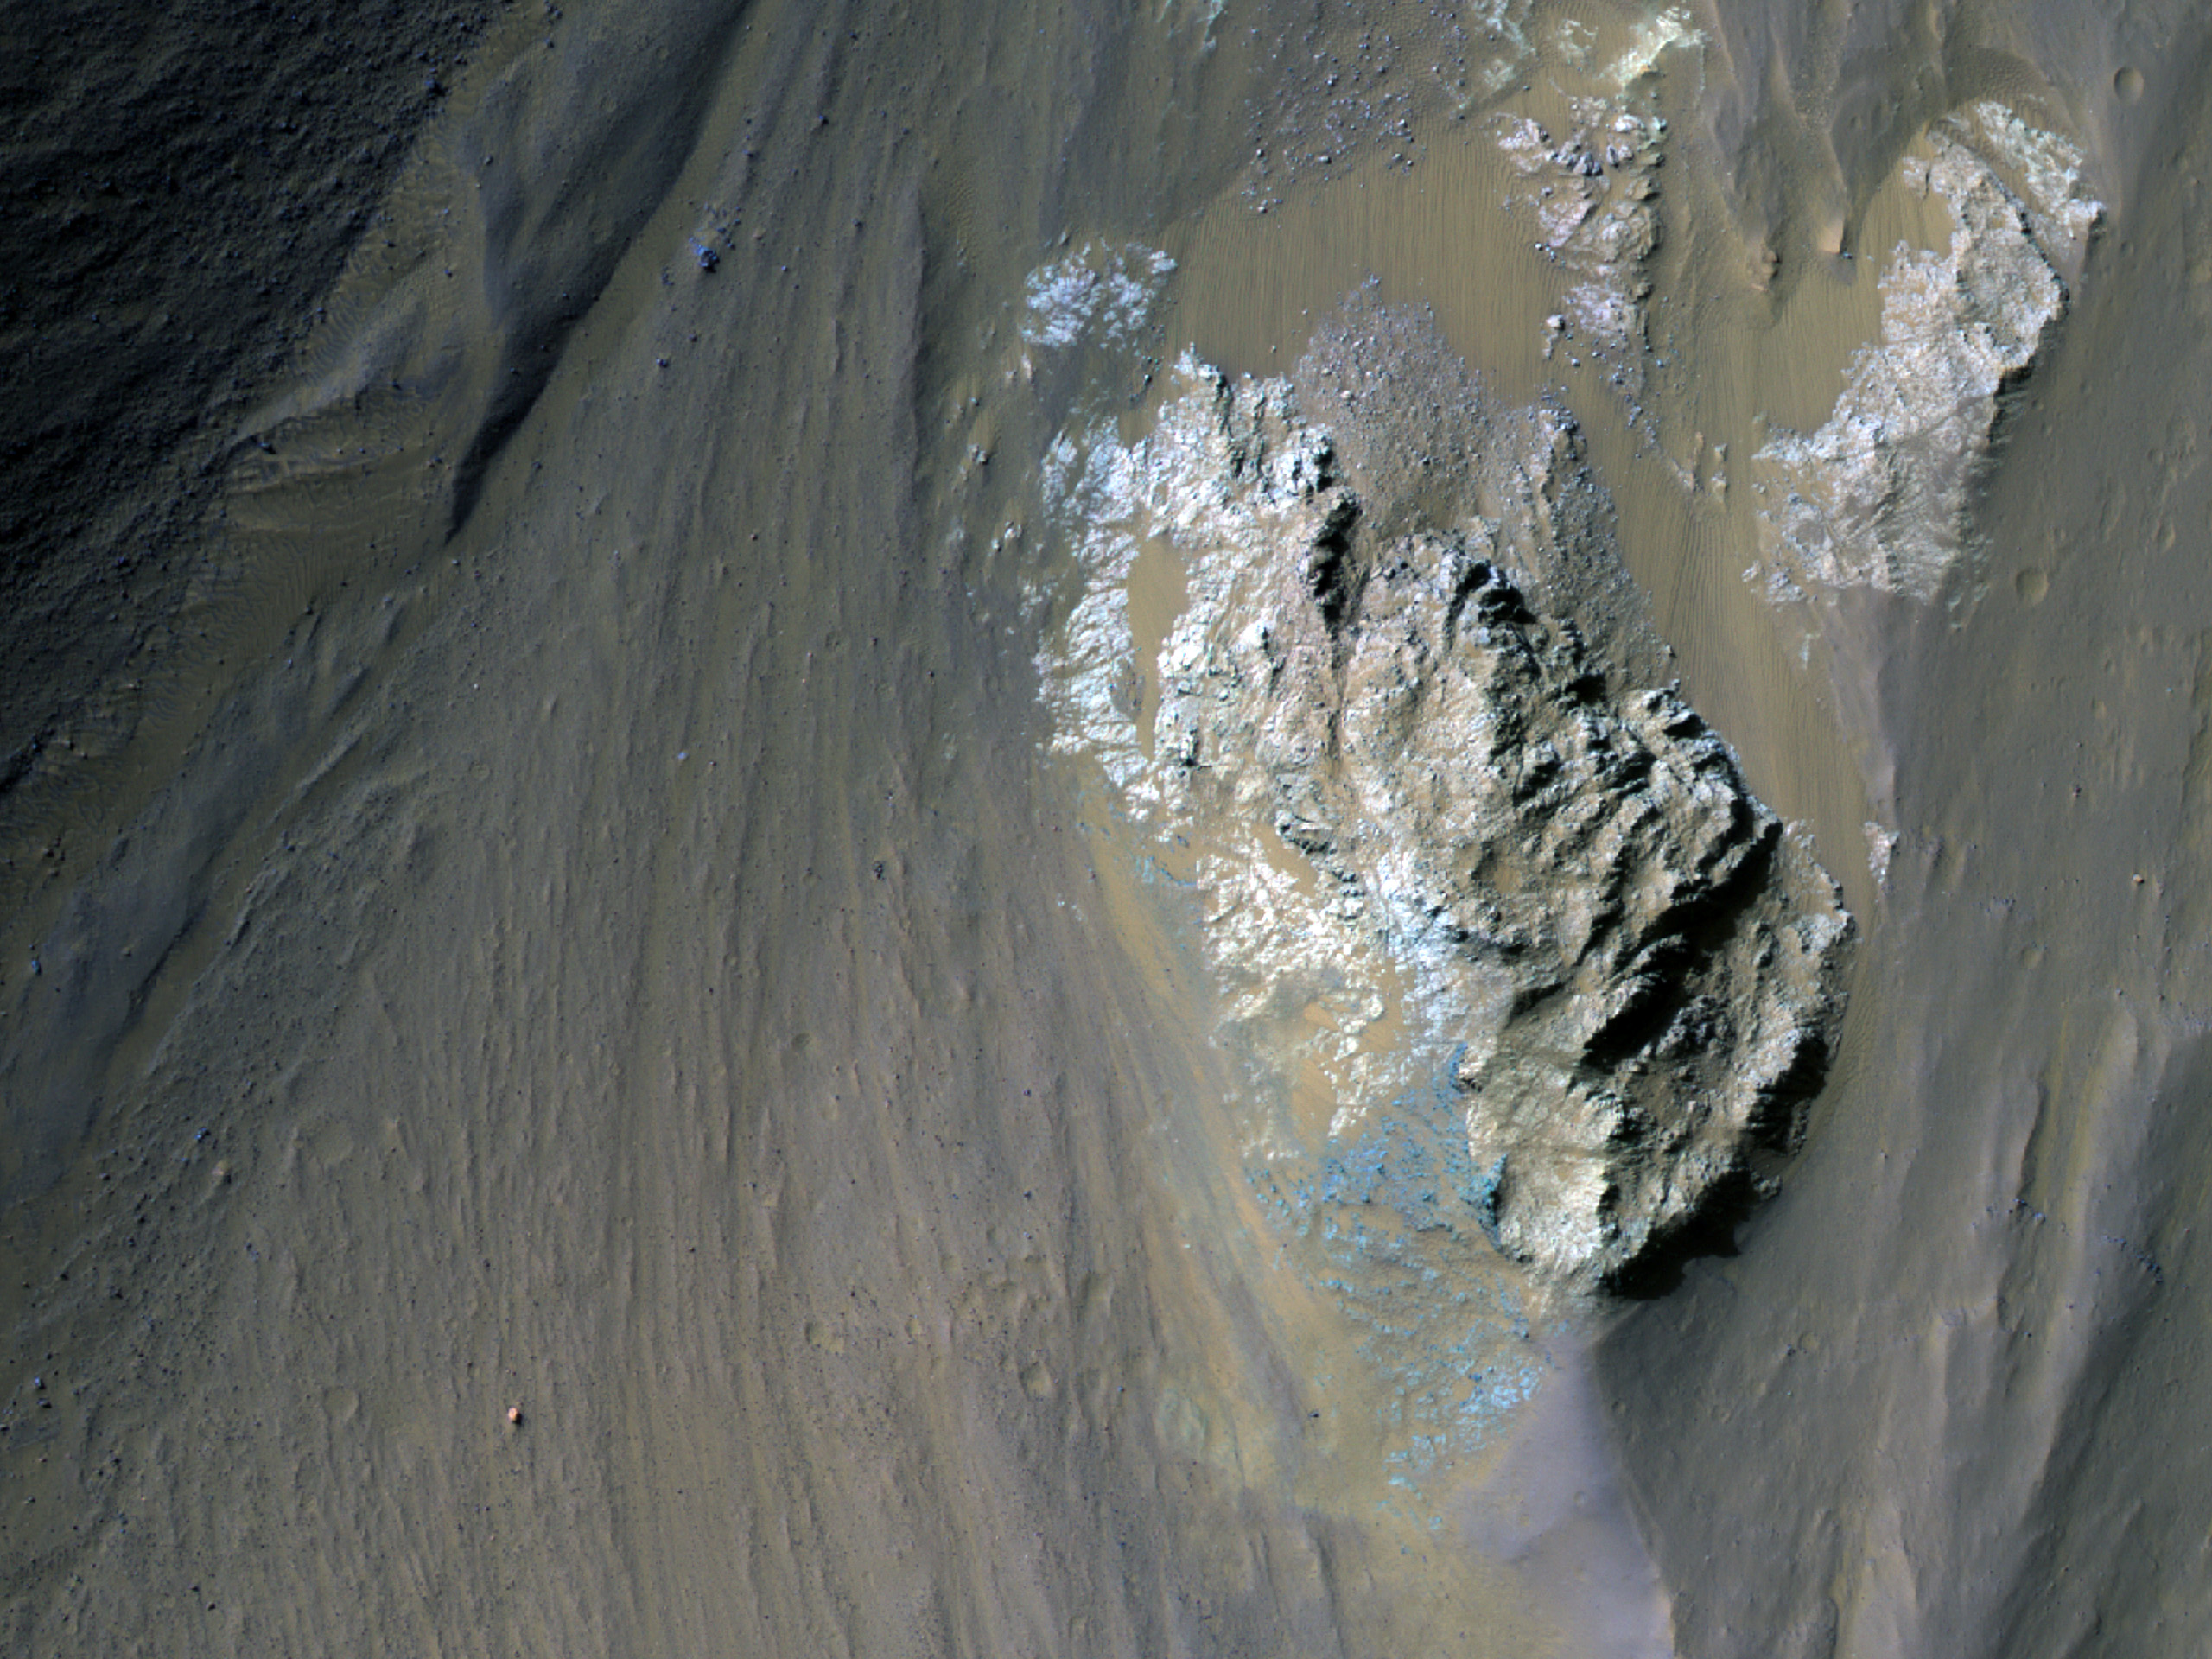 Light-Toned Material in Eastern Nectaris Montes